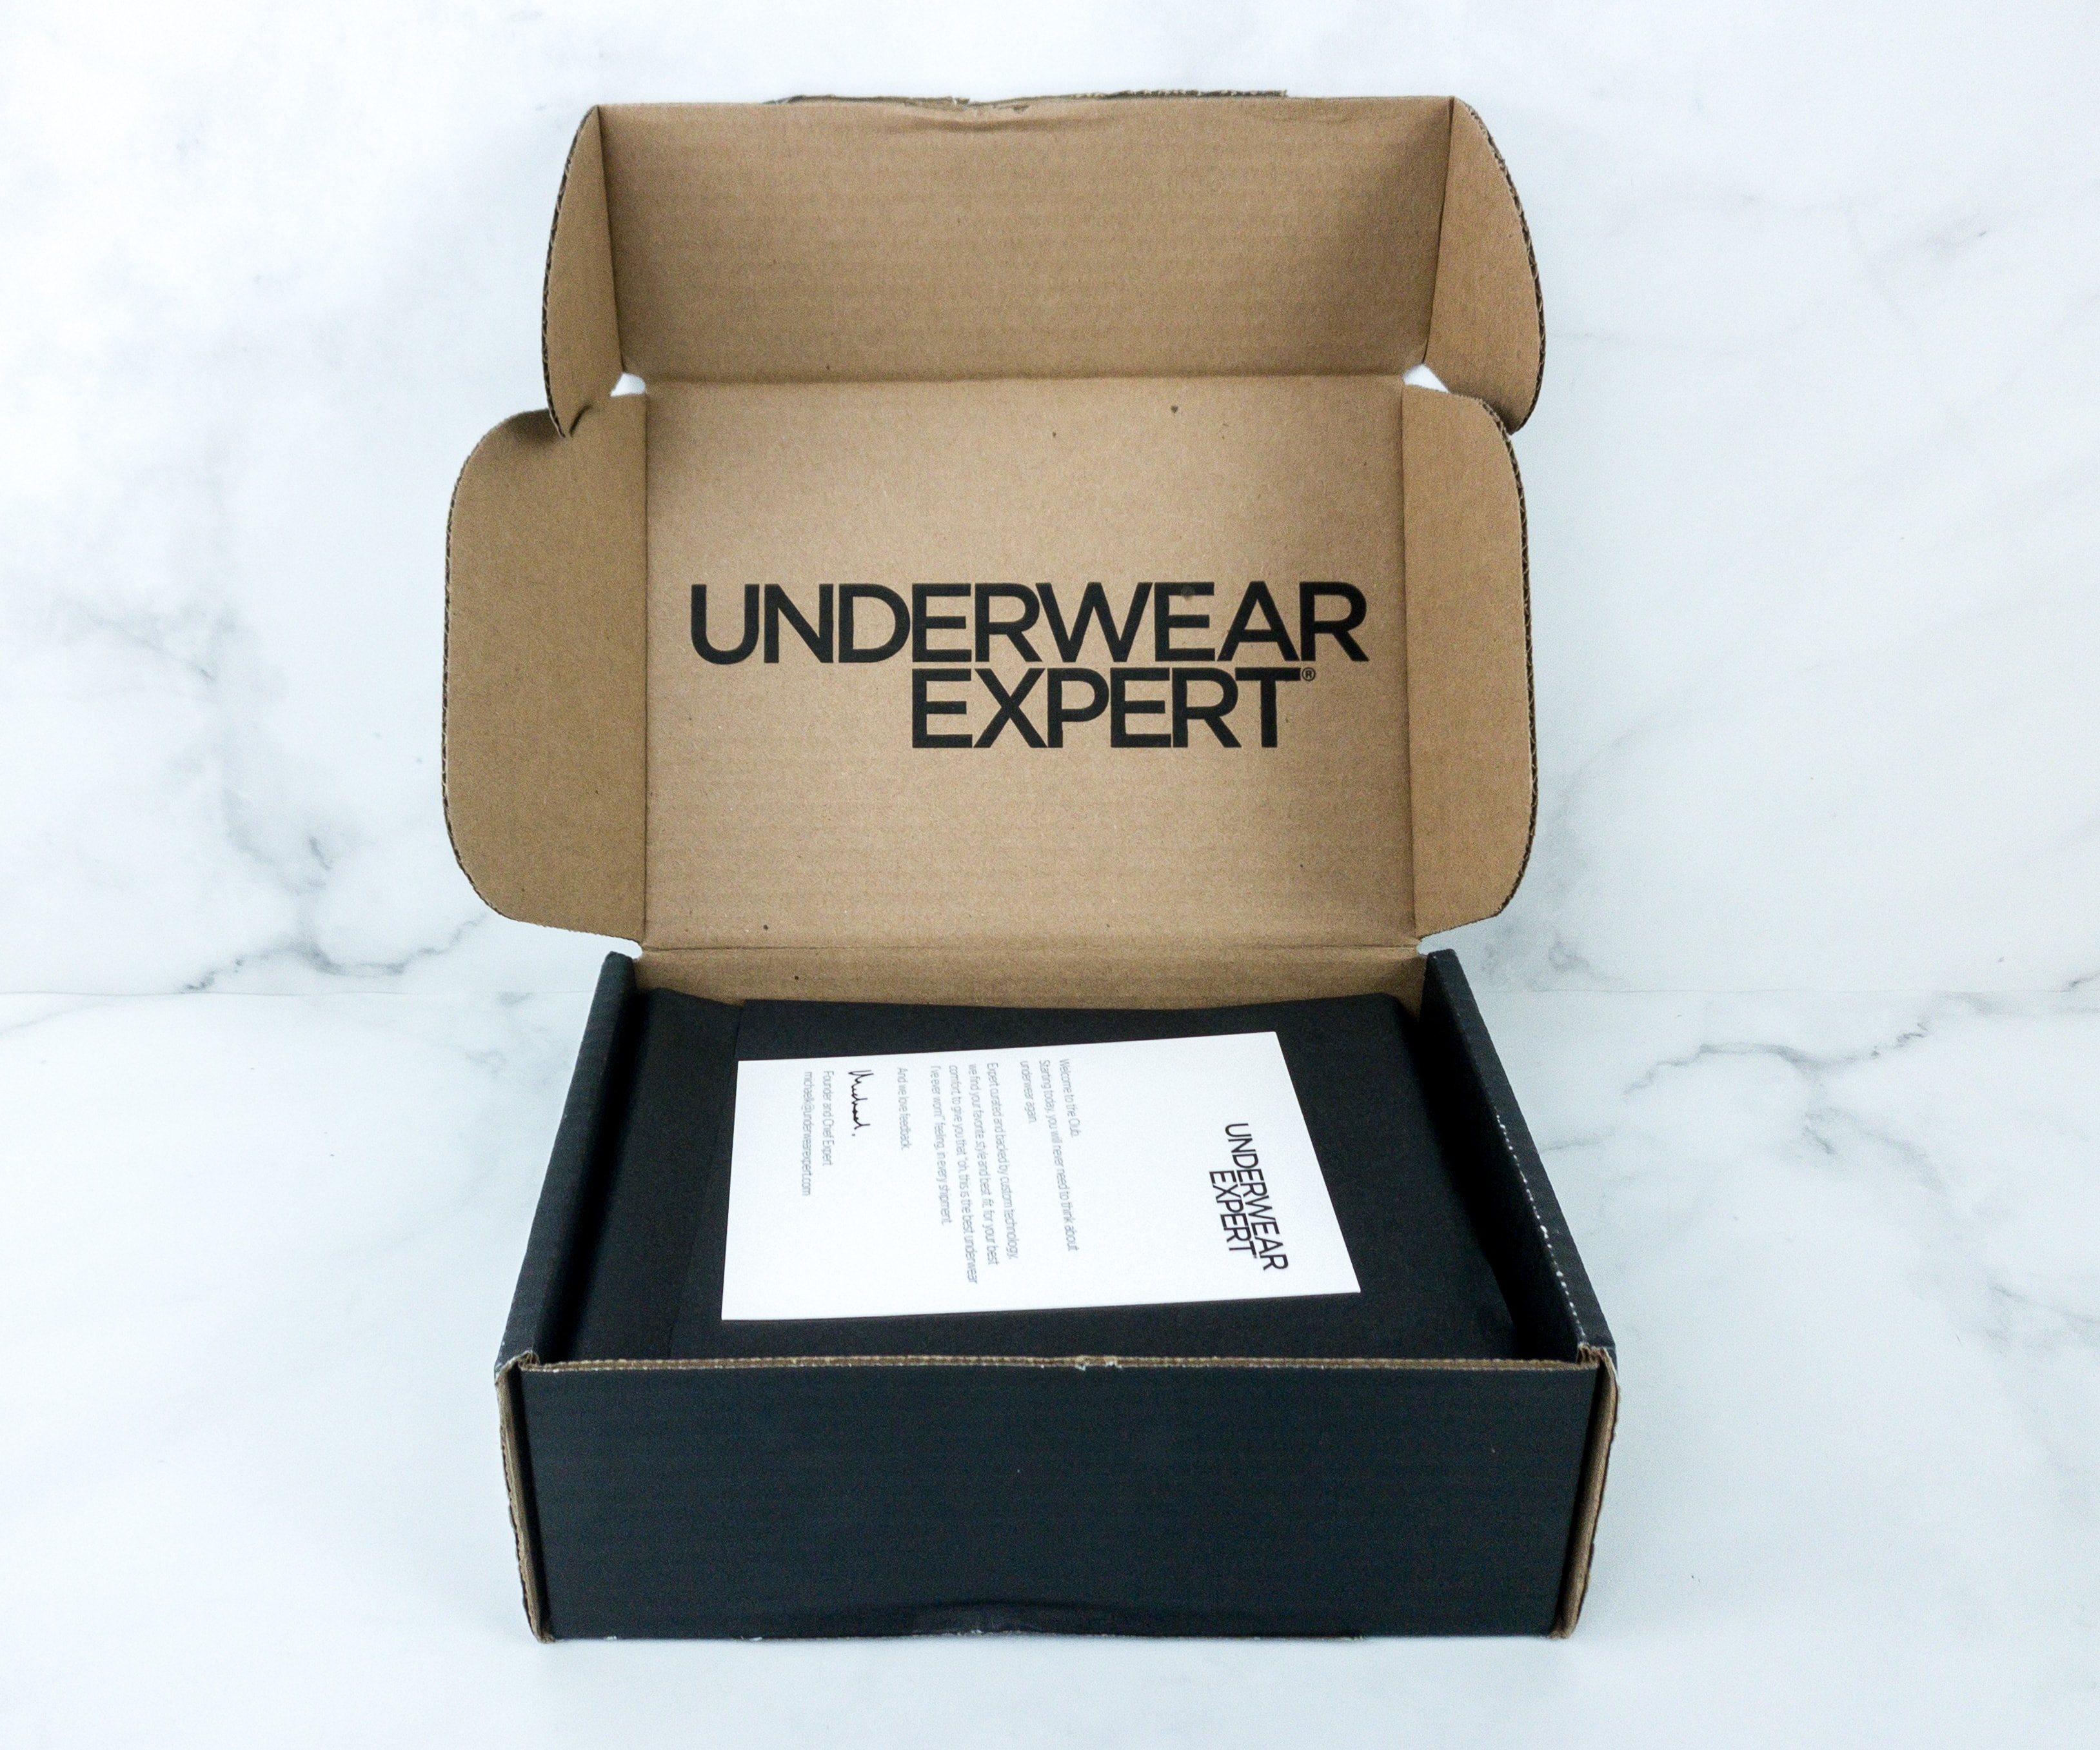 Underwear Expert - Thinking about how comfortable our underwear is